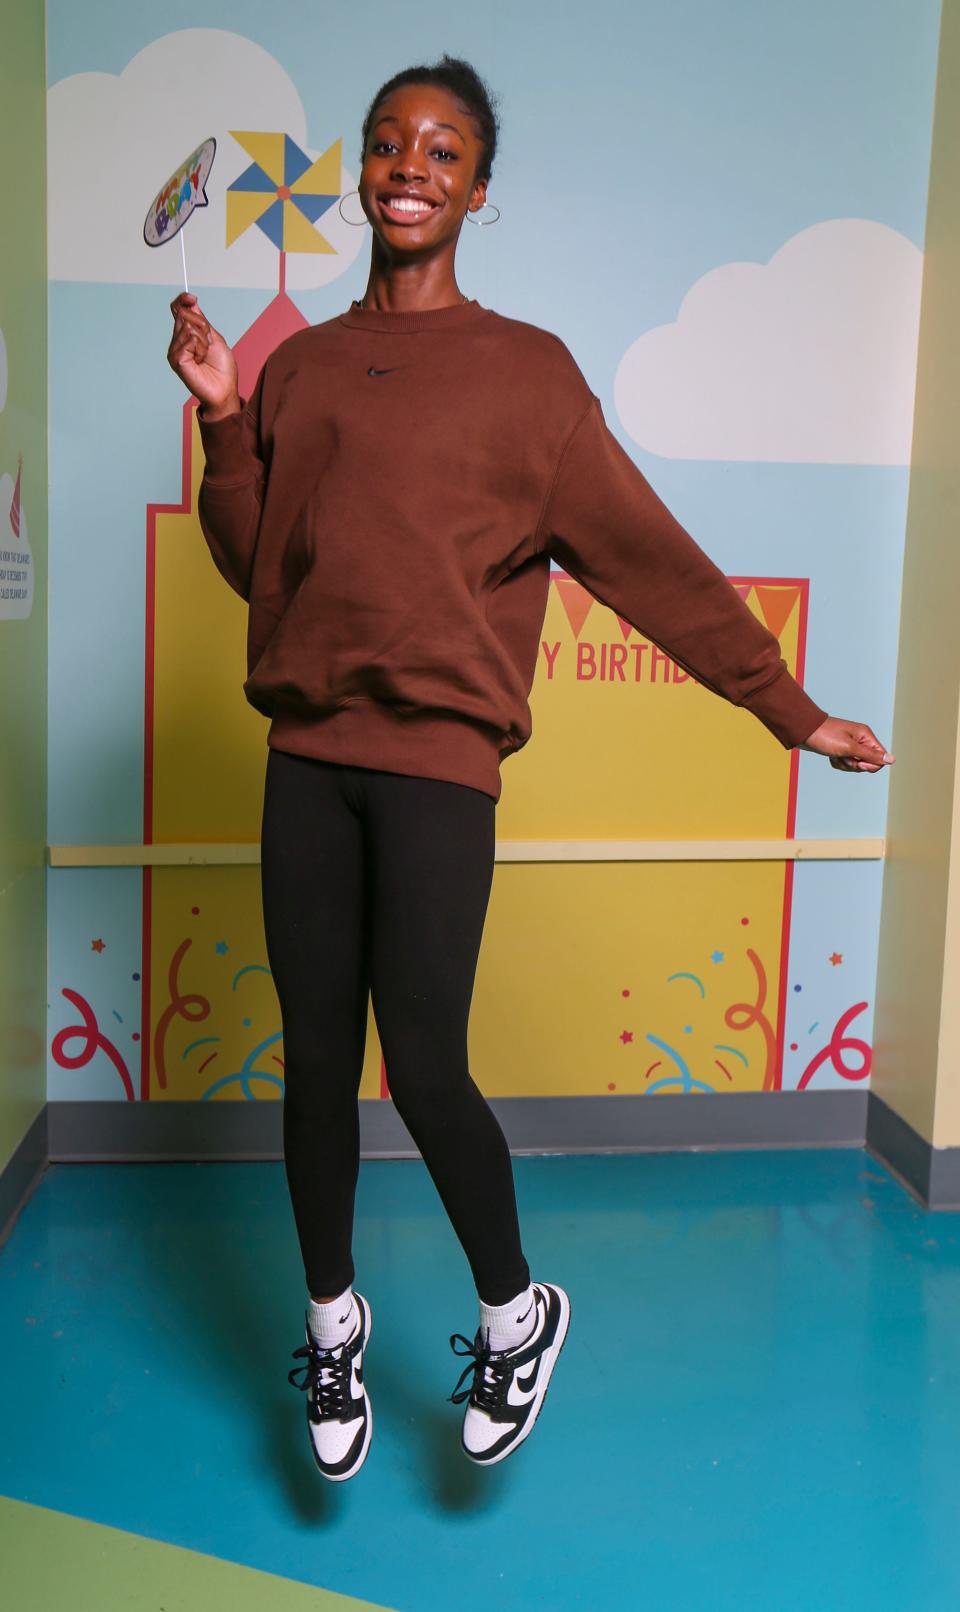 Nissi Wadich turns 16 this Leap Day - her fourth Feb. 29th birthday. She's photographed at the Delaware Children's Museum.